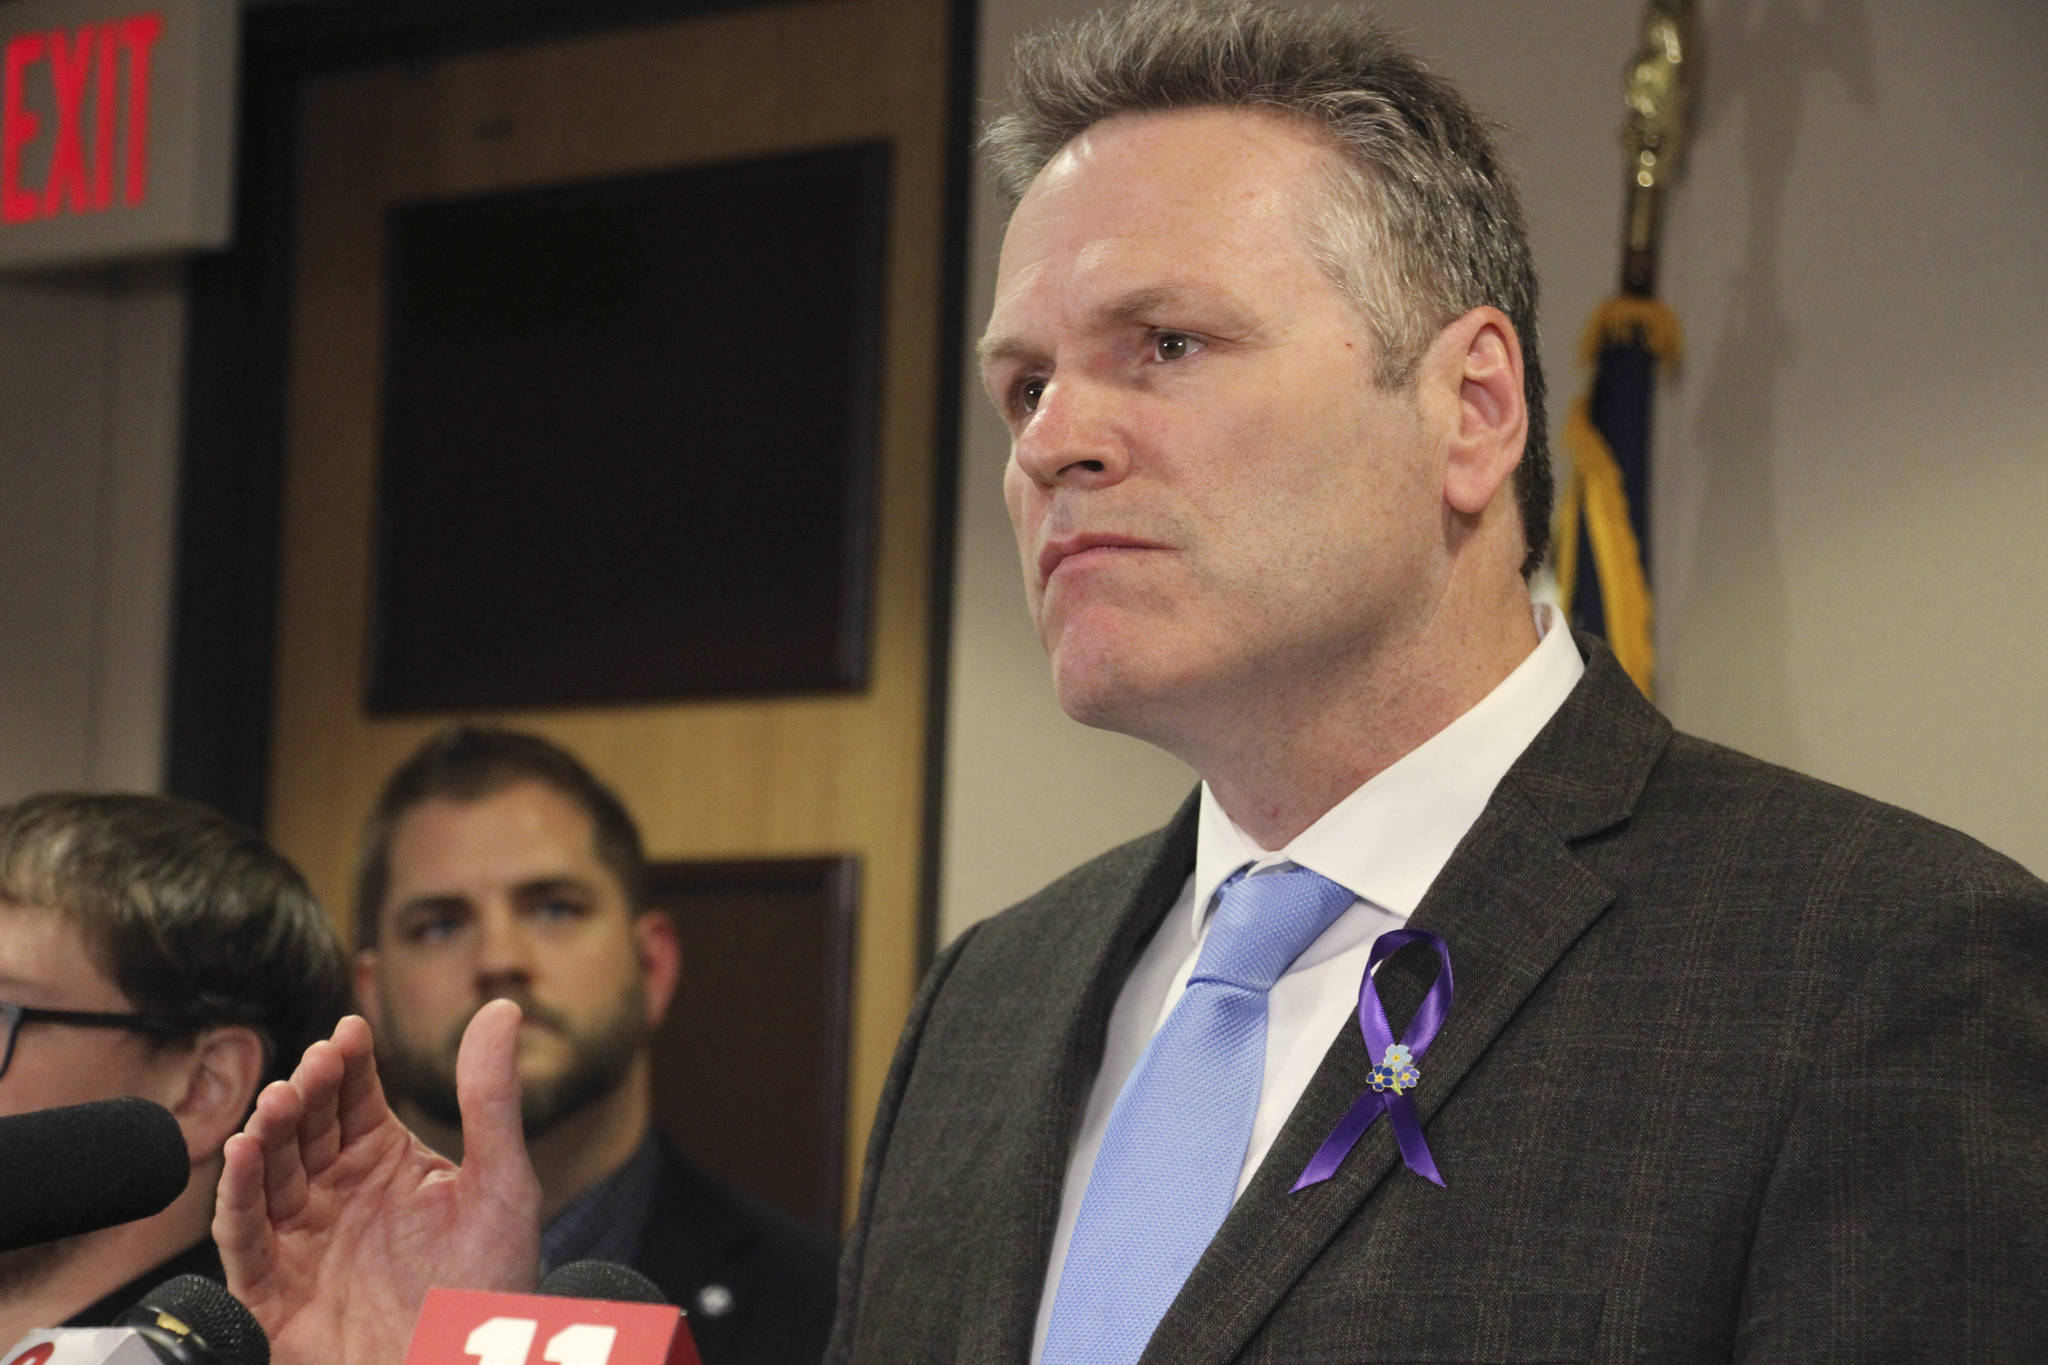 Alaska Gov. Mike Dunleavy announces the state of Alaska has its first positive case of the new coronavirus, during a news conference Thursday, March 12, 2020, in Anchorage, Alaska. (AP Photo/Mark Thiessen)